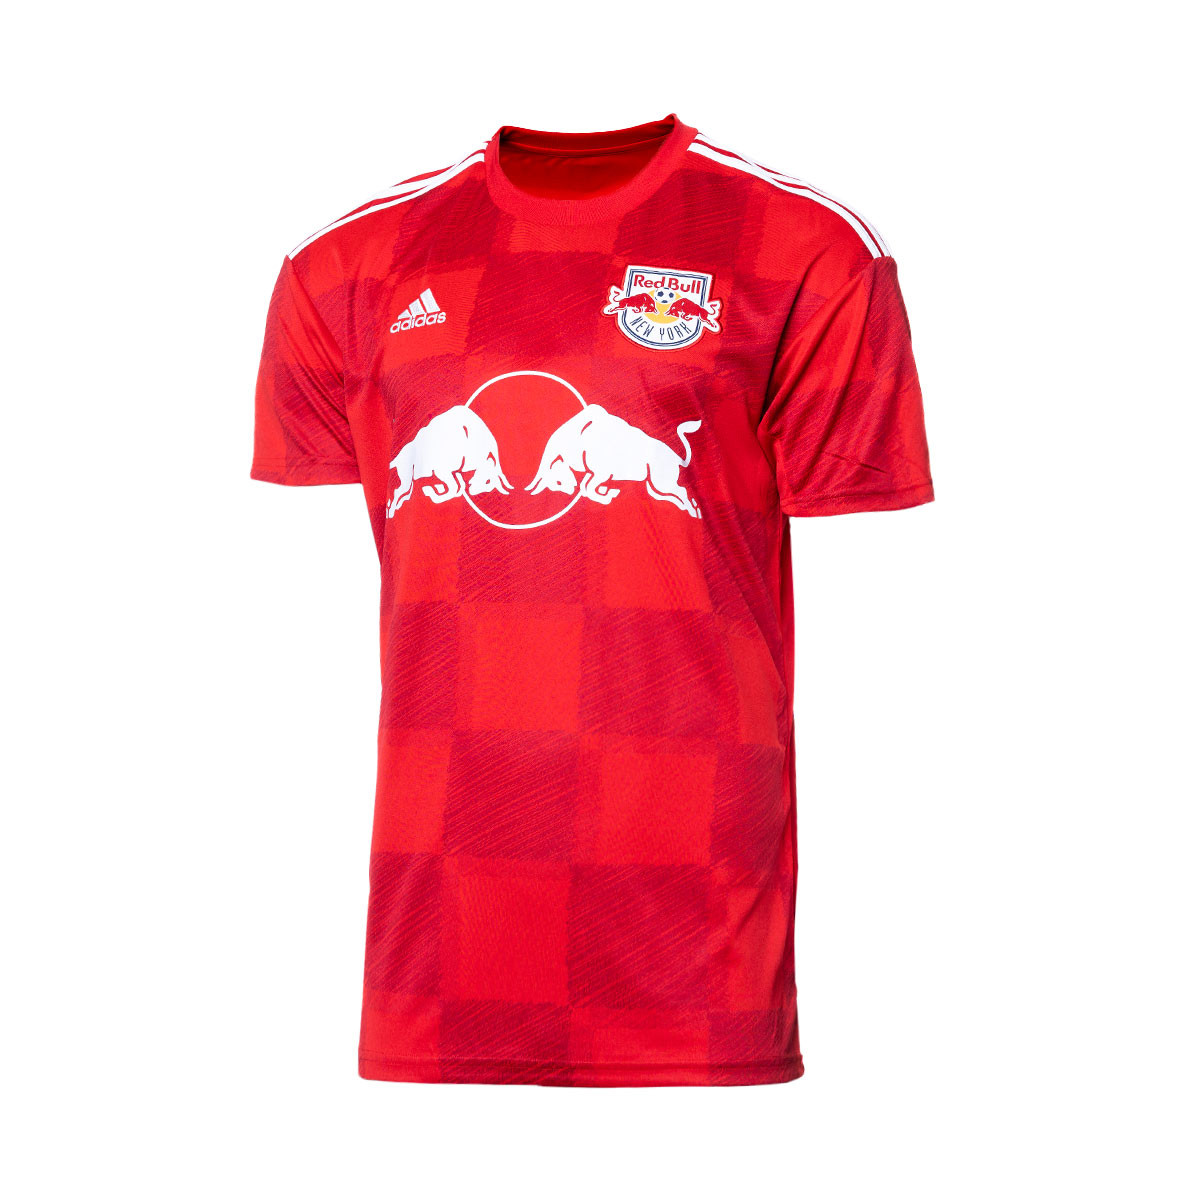 Visiter la boutique adidasadidas Maillot de Football New York Red Bulls pour Homme 